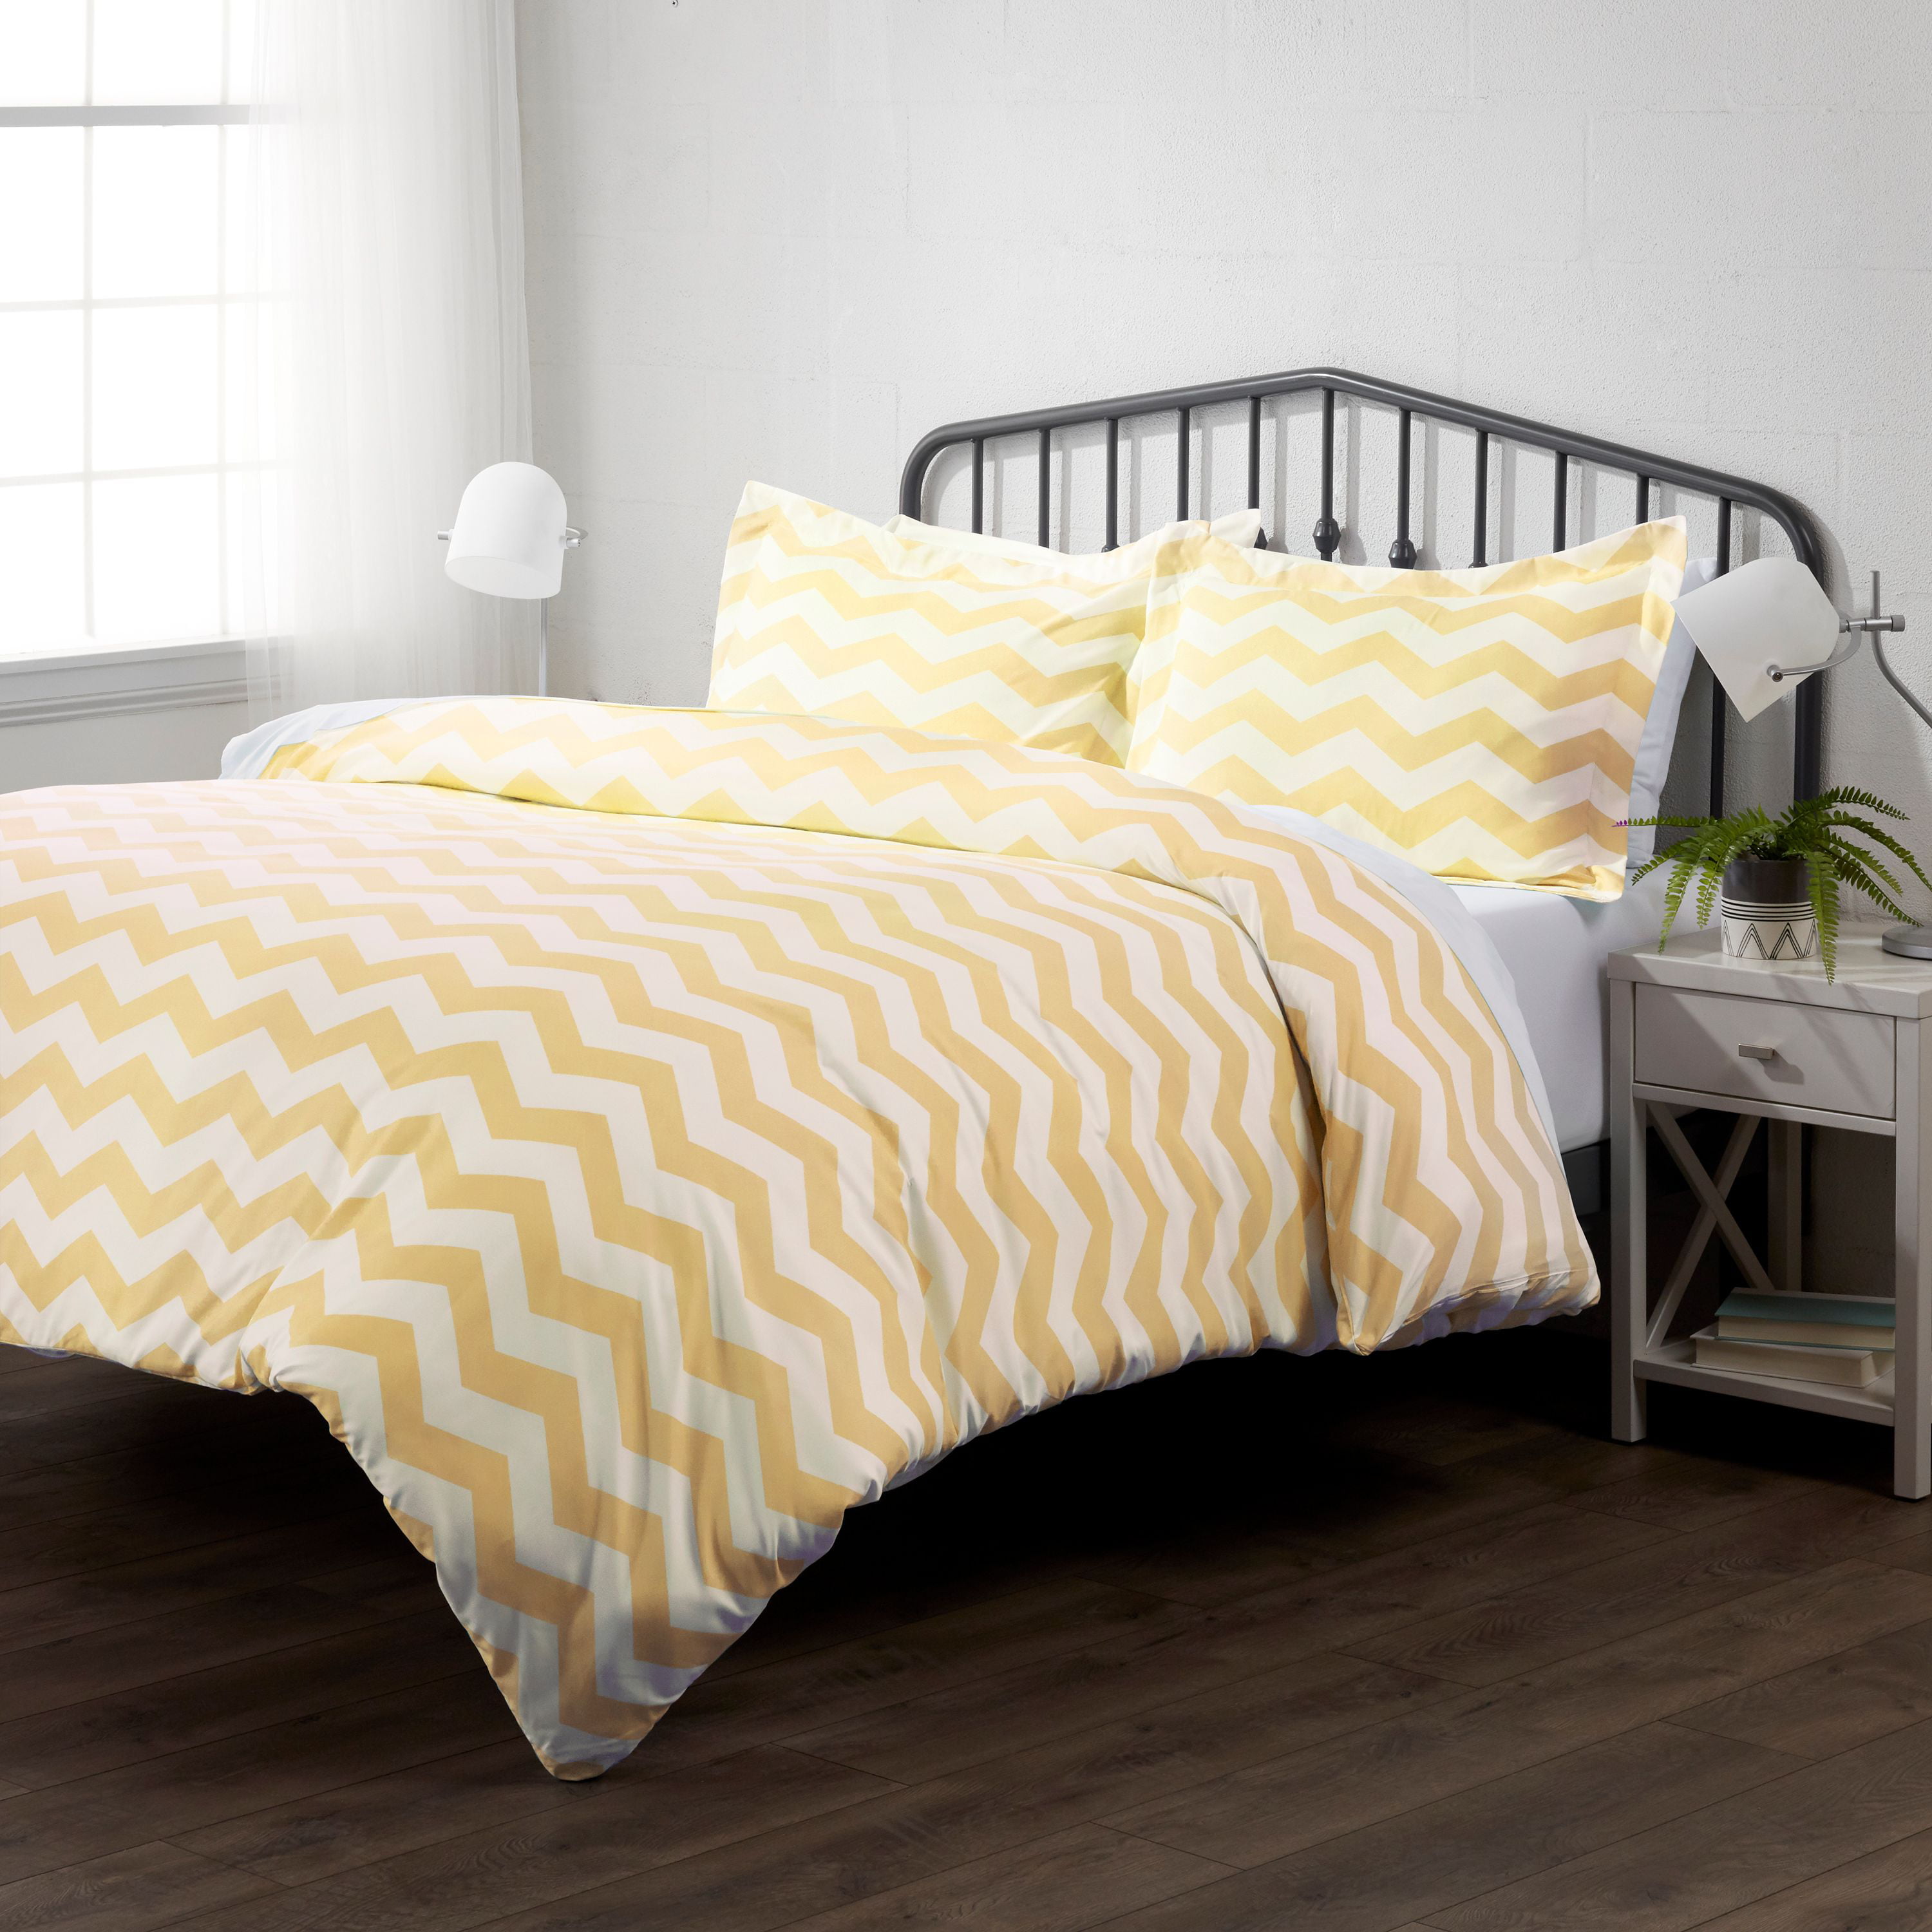 King Size Mustard Yellow Wide Stripe Duvet Cover Bedding Set With 2 Pillowcases 